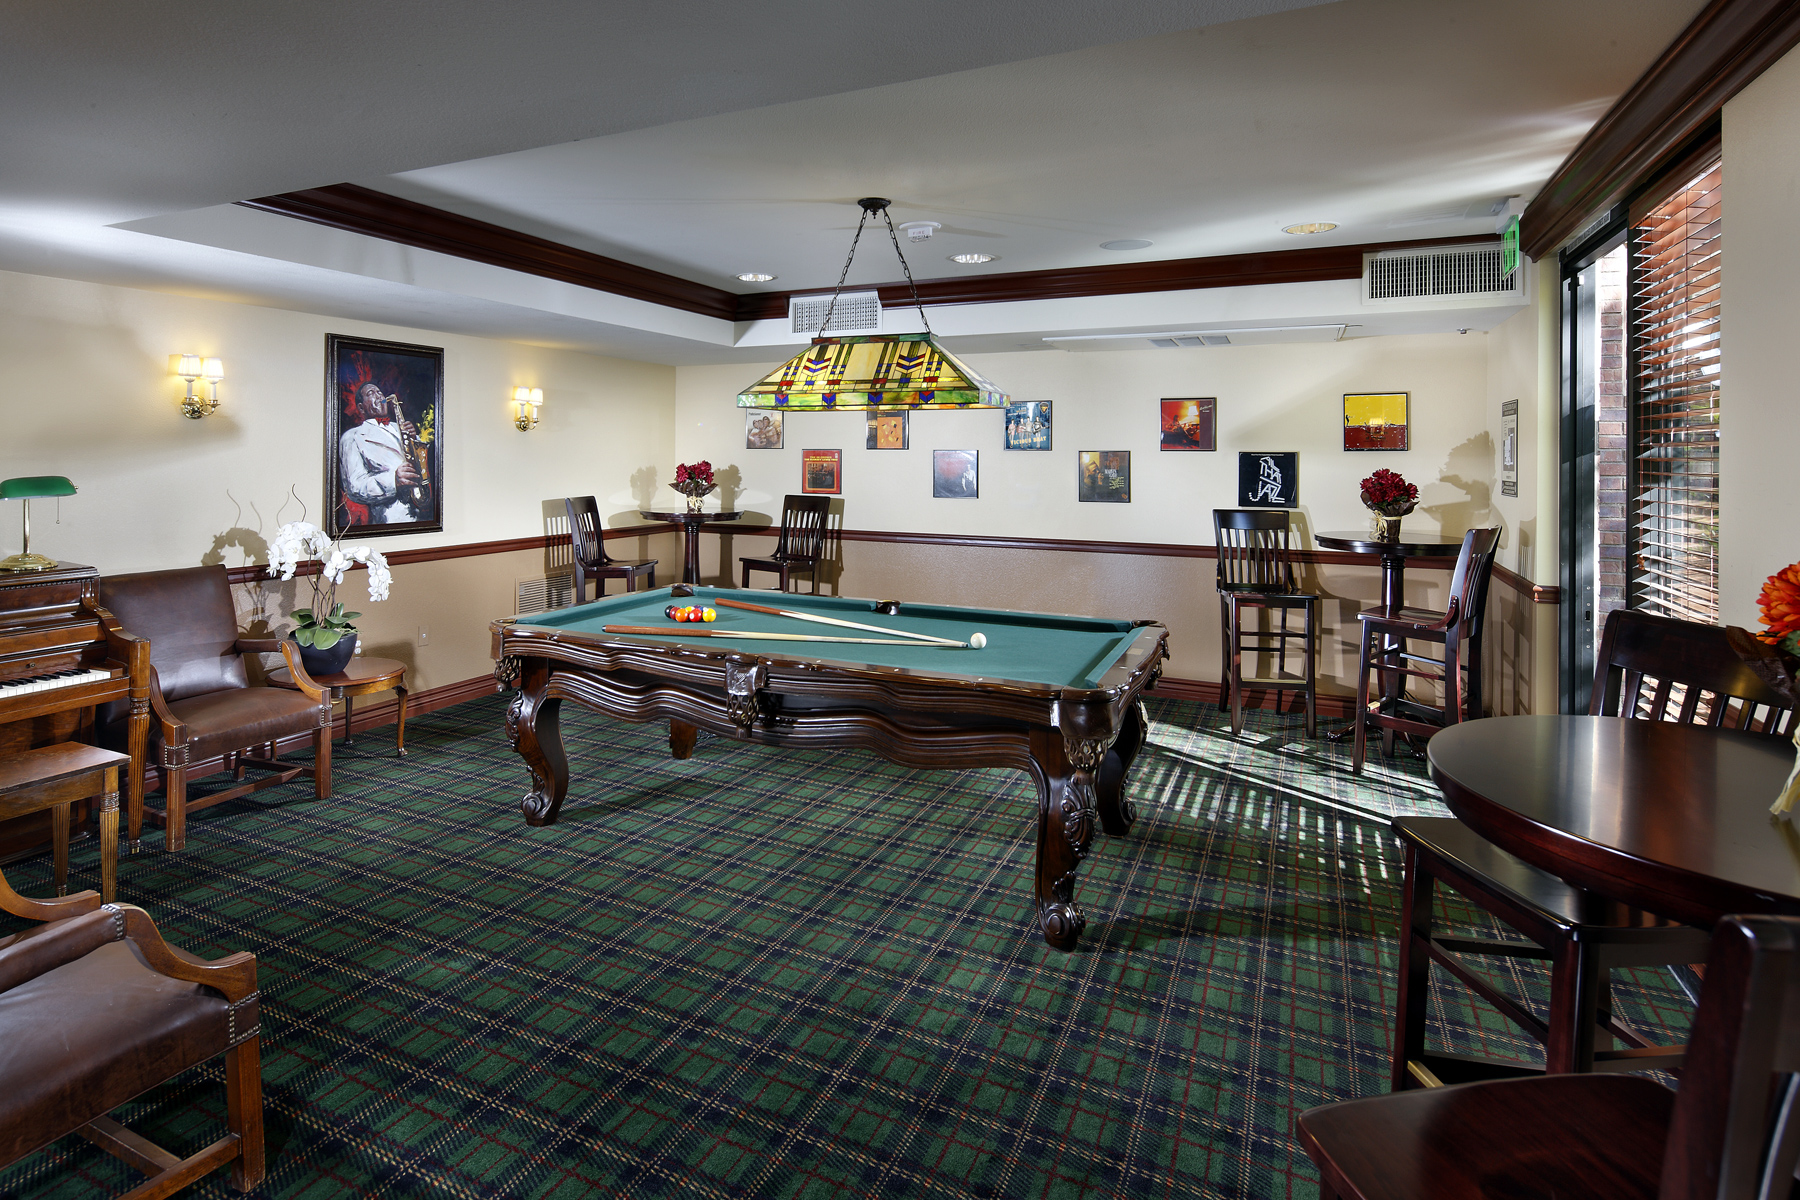 Rittenhouse billiard room. Pool table located near center of room. seating and tables along the walls of the room. large brown piano against wall. Decorative photos on the walls.